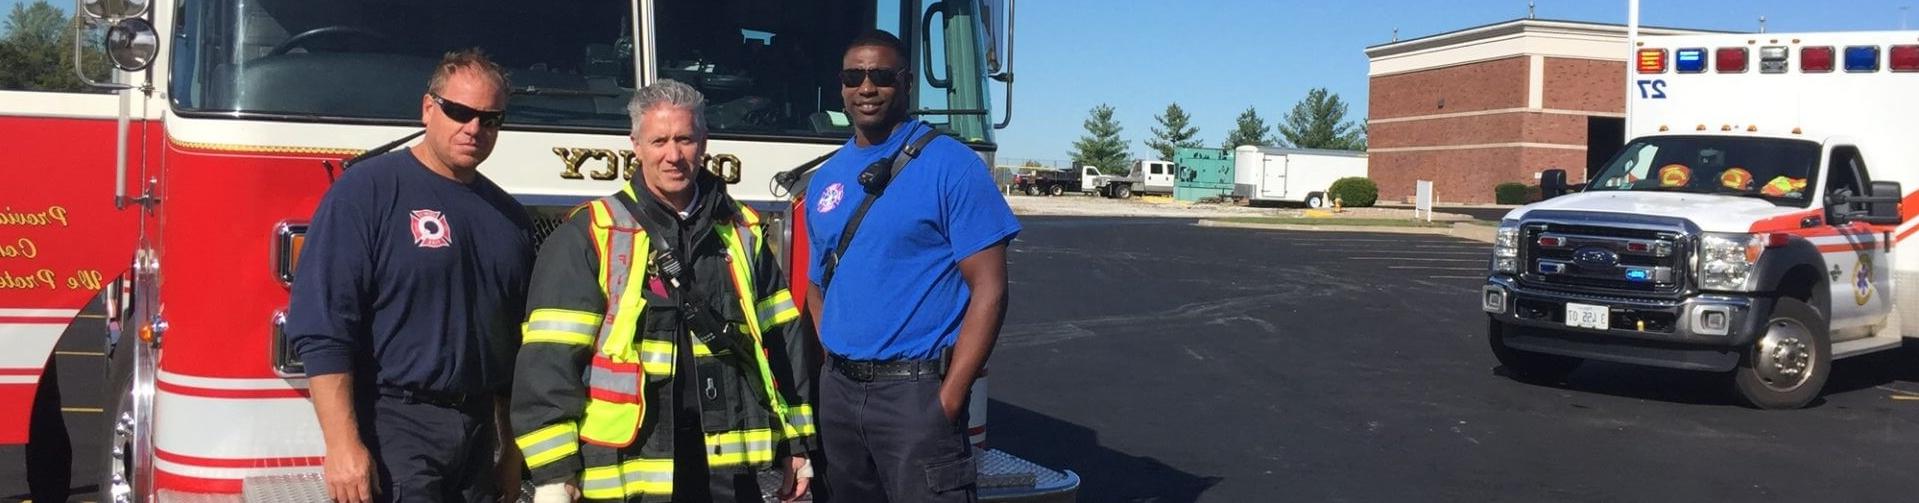 A police officer, firefighter, and medic pose in front of emergency vehicles